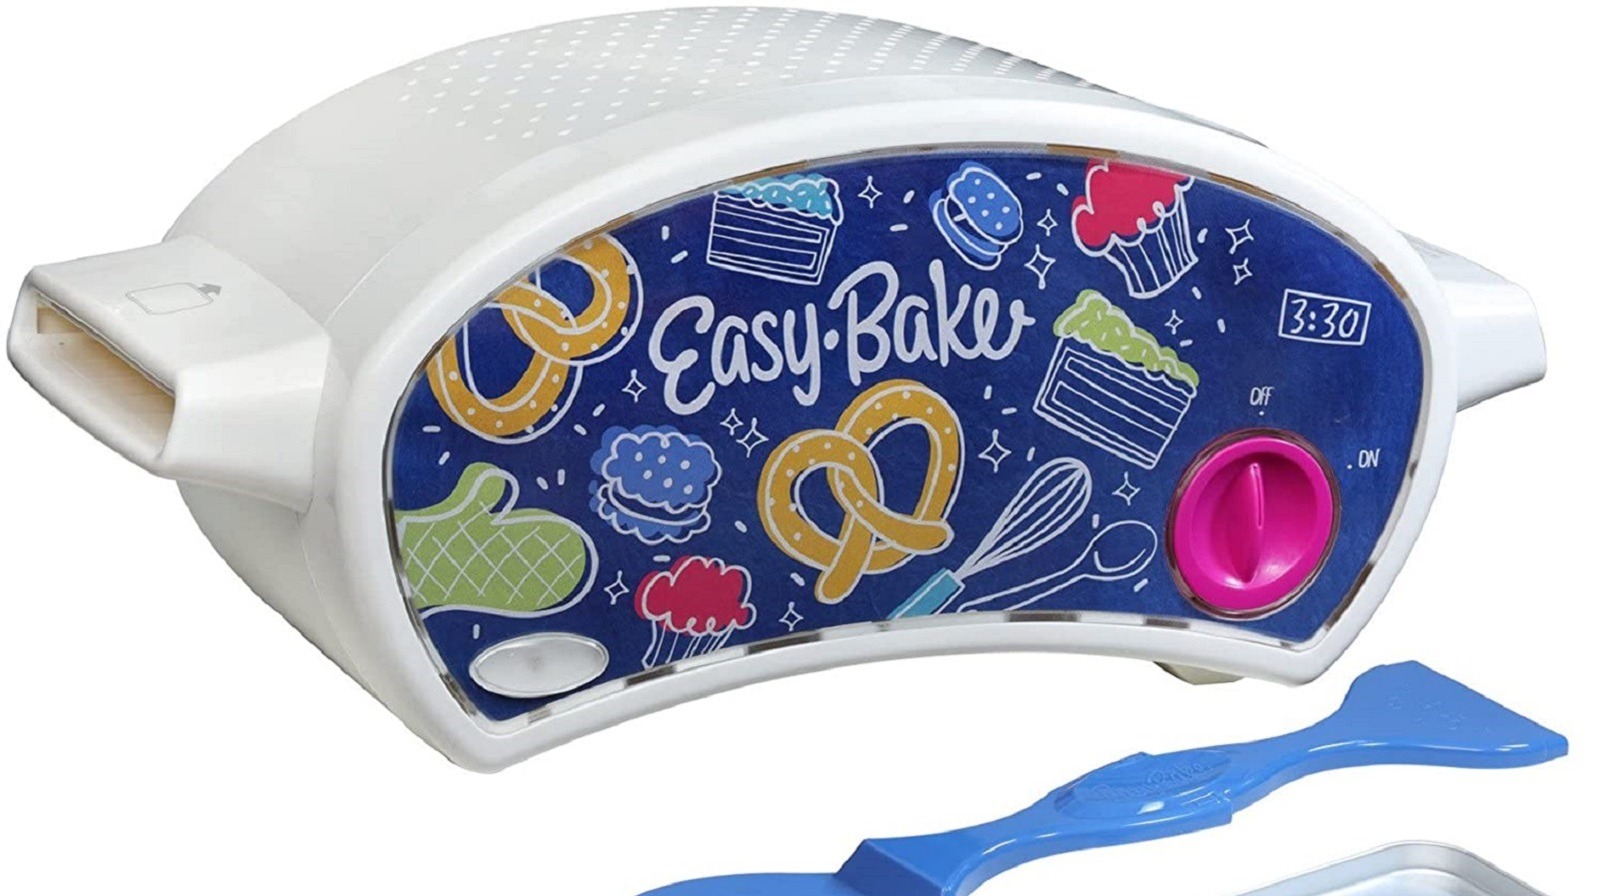 The Untold Truth Of The EasyBake Oven